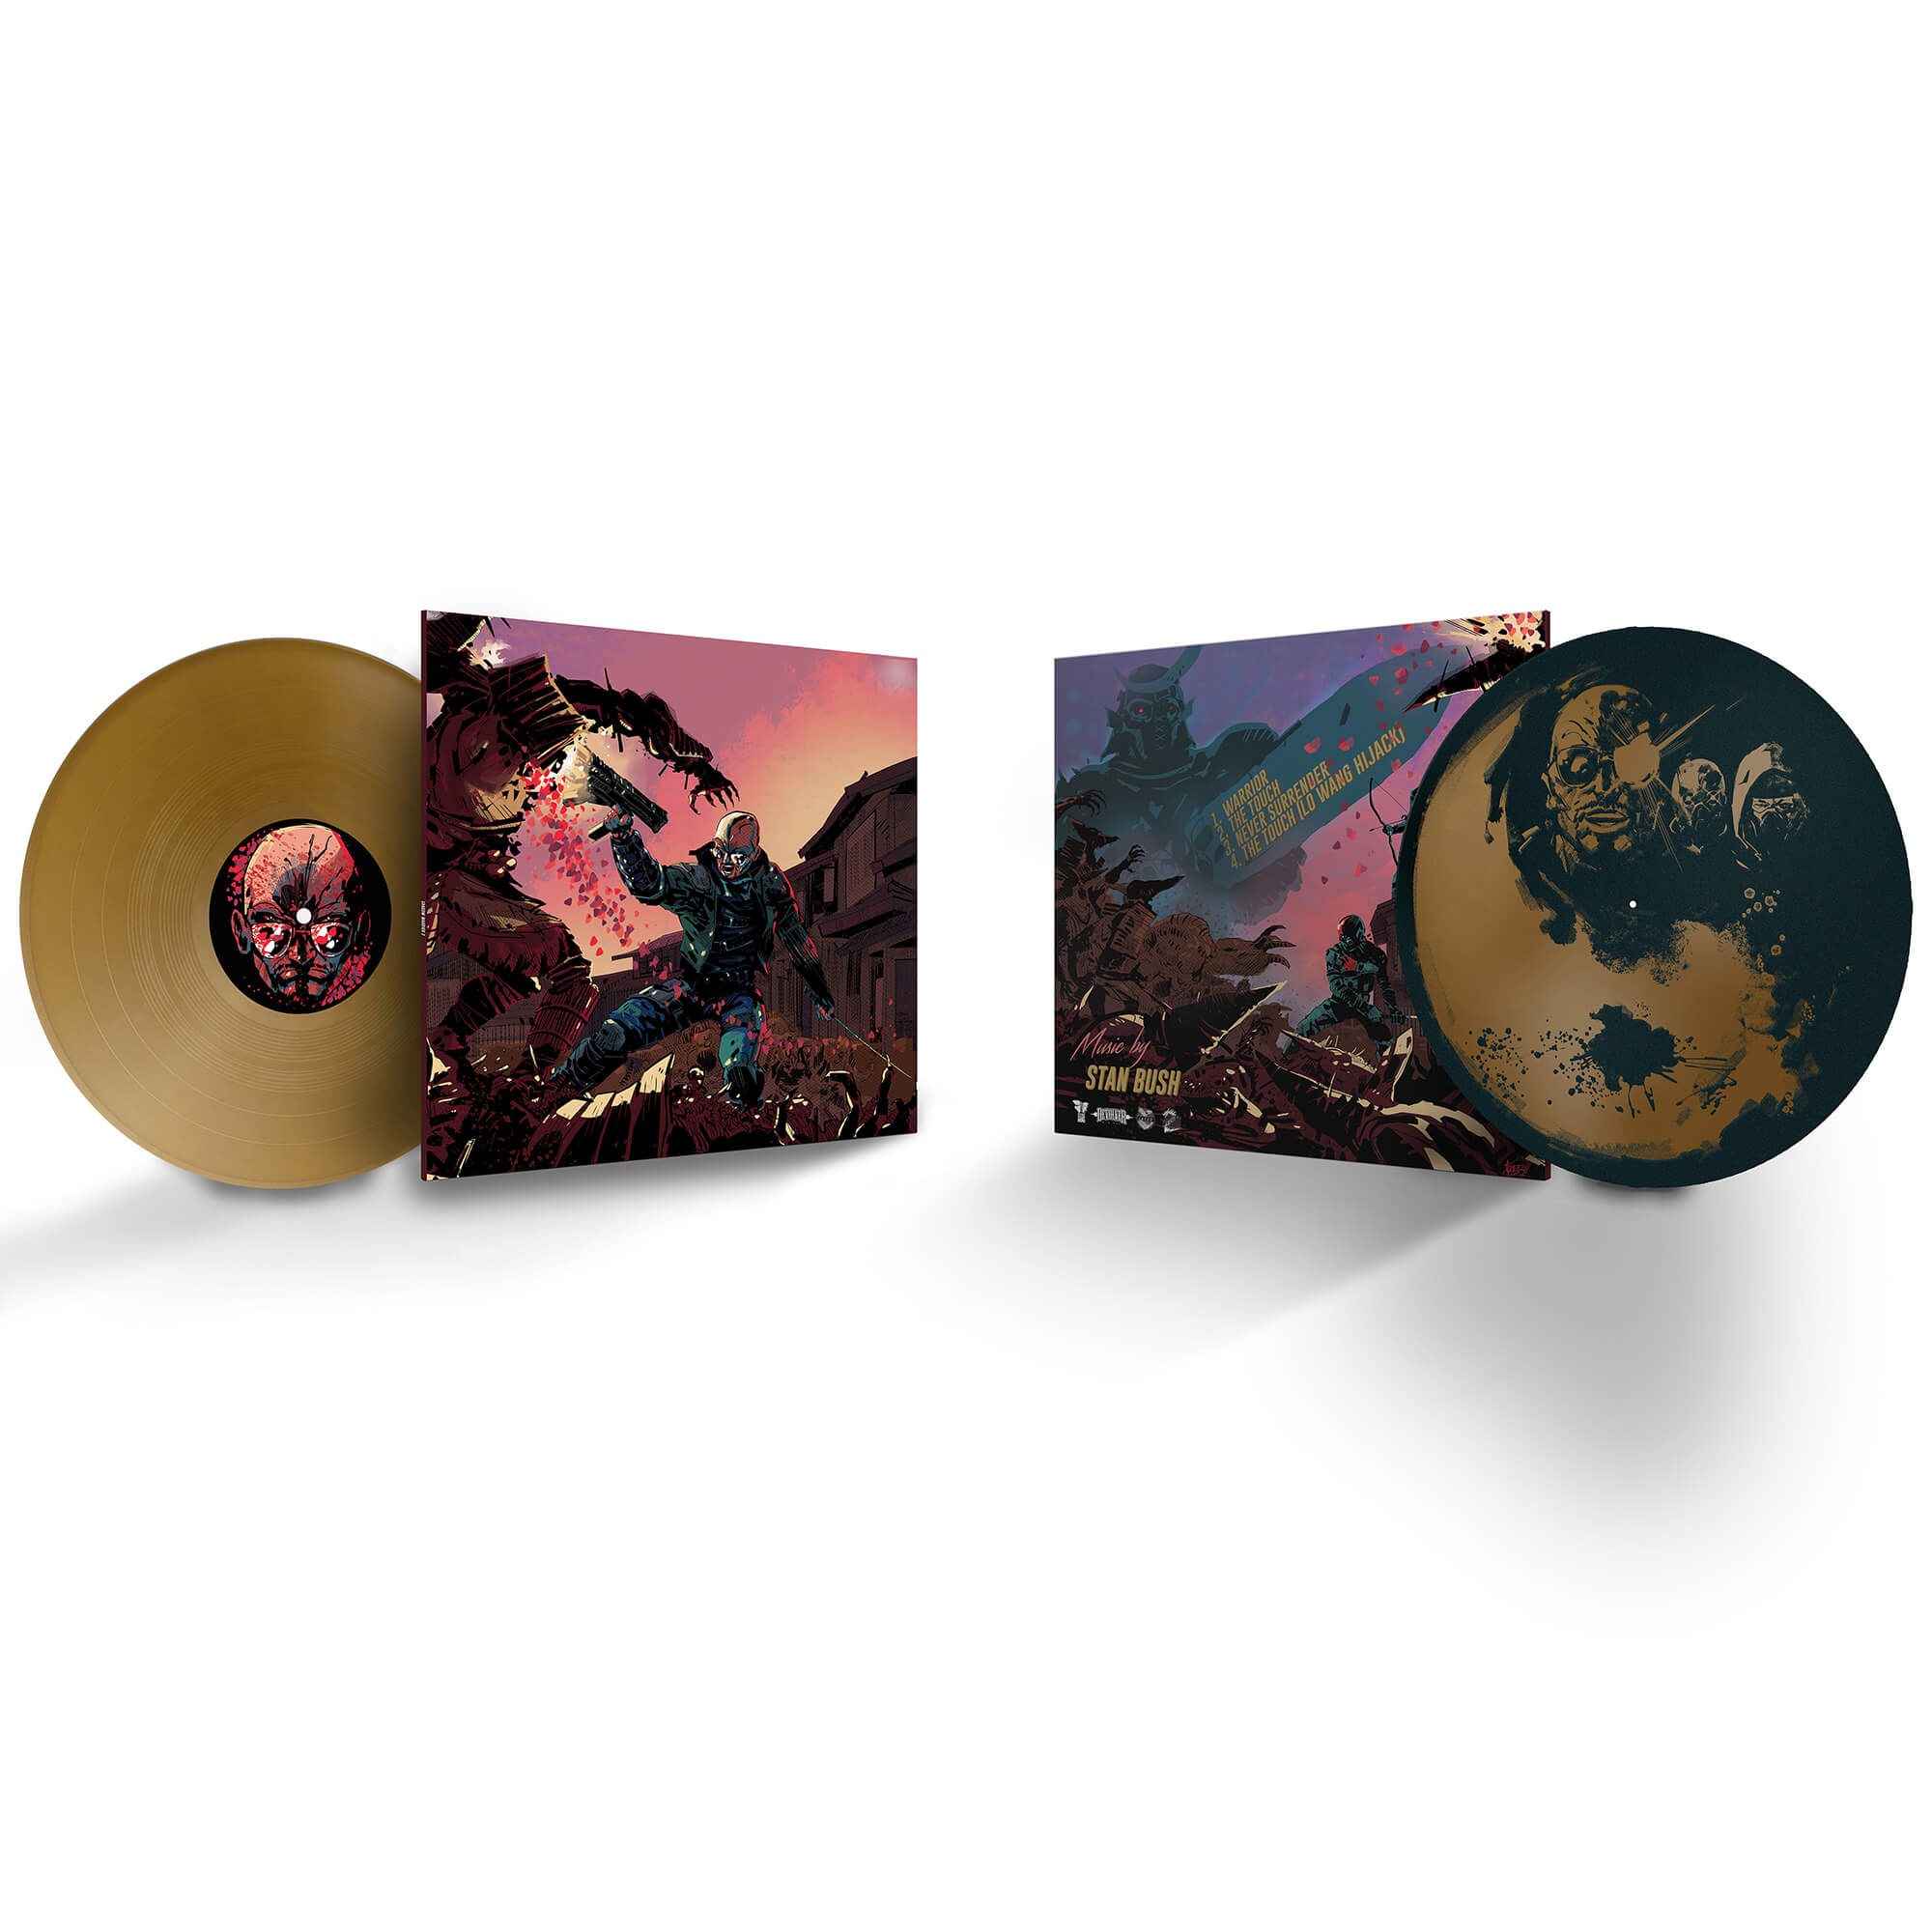 SHADOW WARRIOR 2 'WARRIOR' Vinyl announced featuring new track from iconic  Rockstar STAN BUSH 👾 COSMOCOVER - The best PR agency for video games in  Europe!